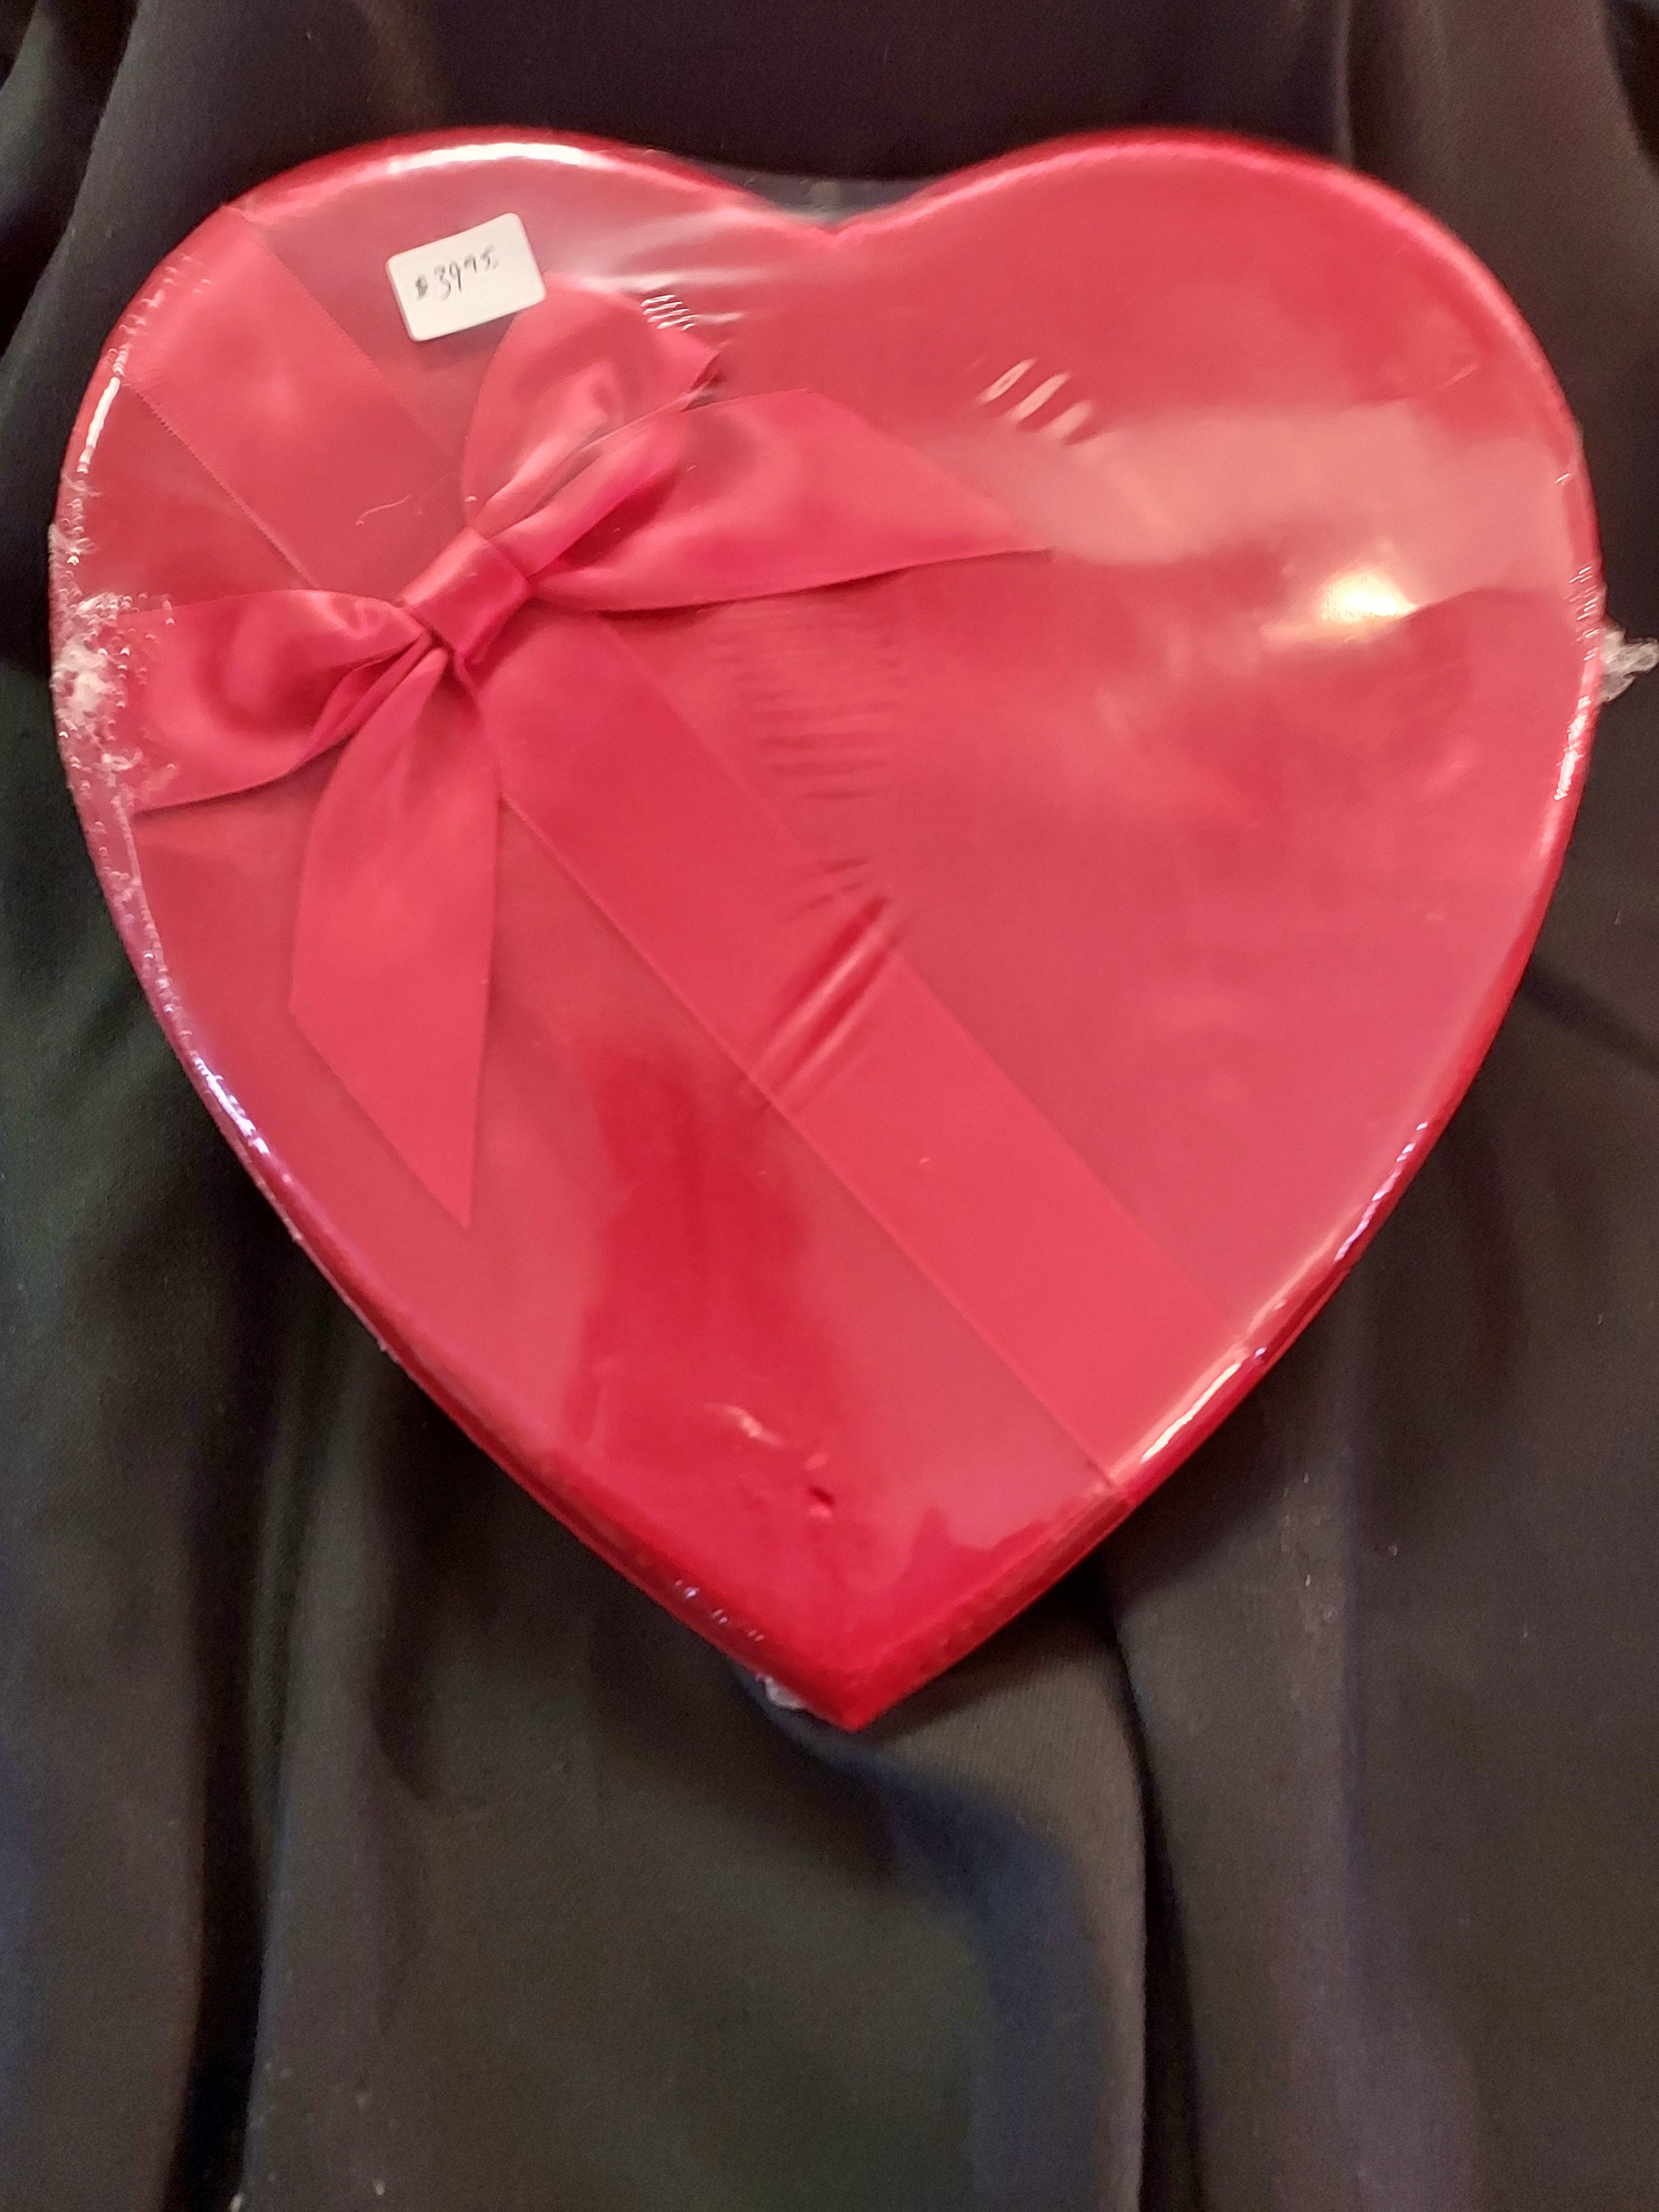 SIMPLY CHOCOLATE CANDY - HEART BOX WITH 4.47 OZ CANDY OR  LARGE 12.3 OZ